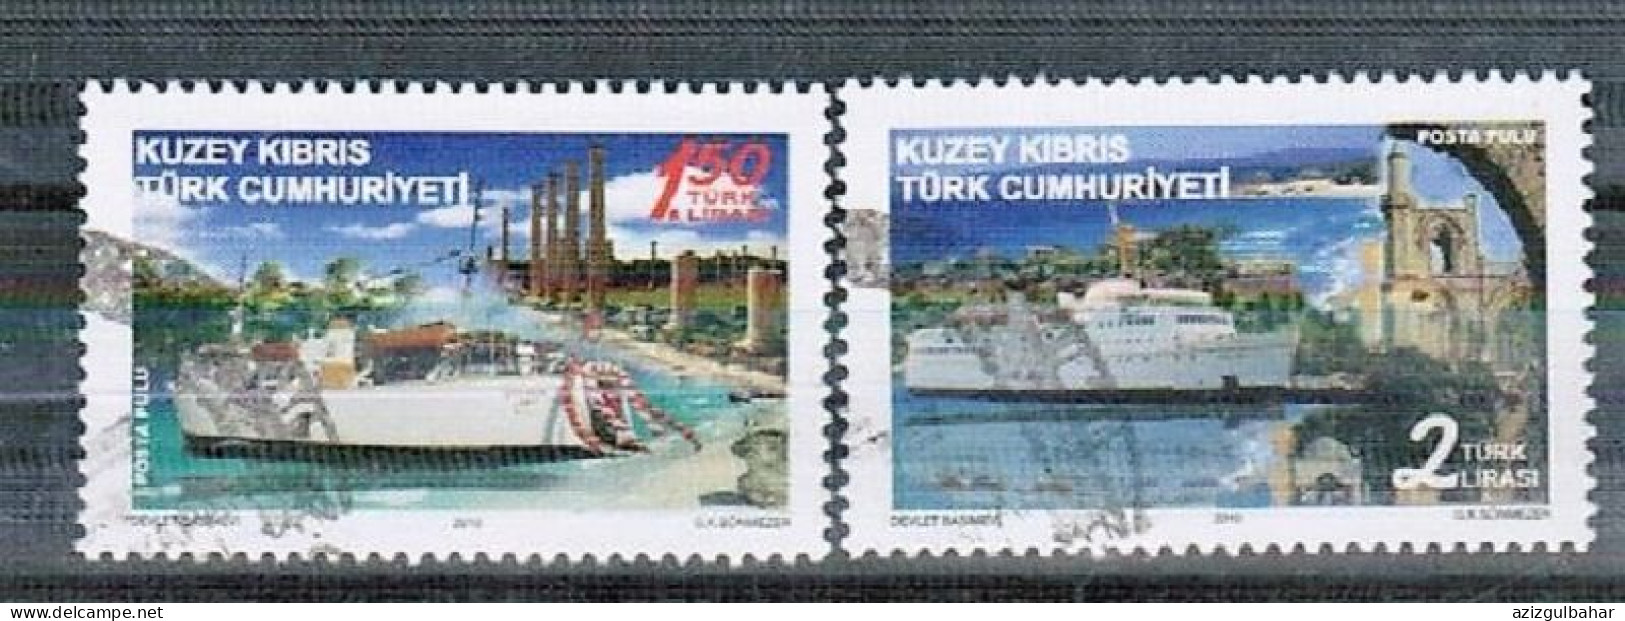 2010 - CRUISING SHIPS - TRANSPORTATION - TURKISH CYPRIOT STAMPS - STAMPS - USED - Gebraucht